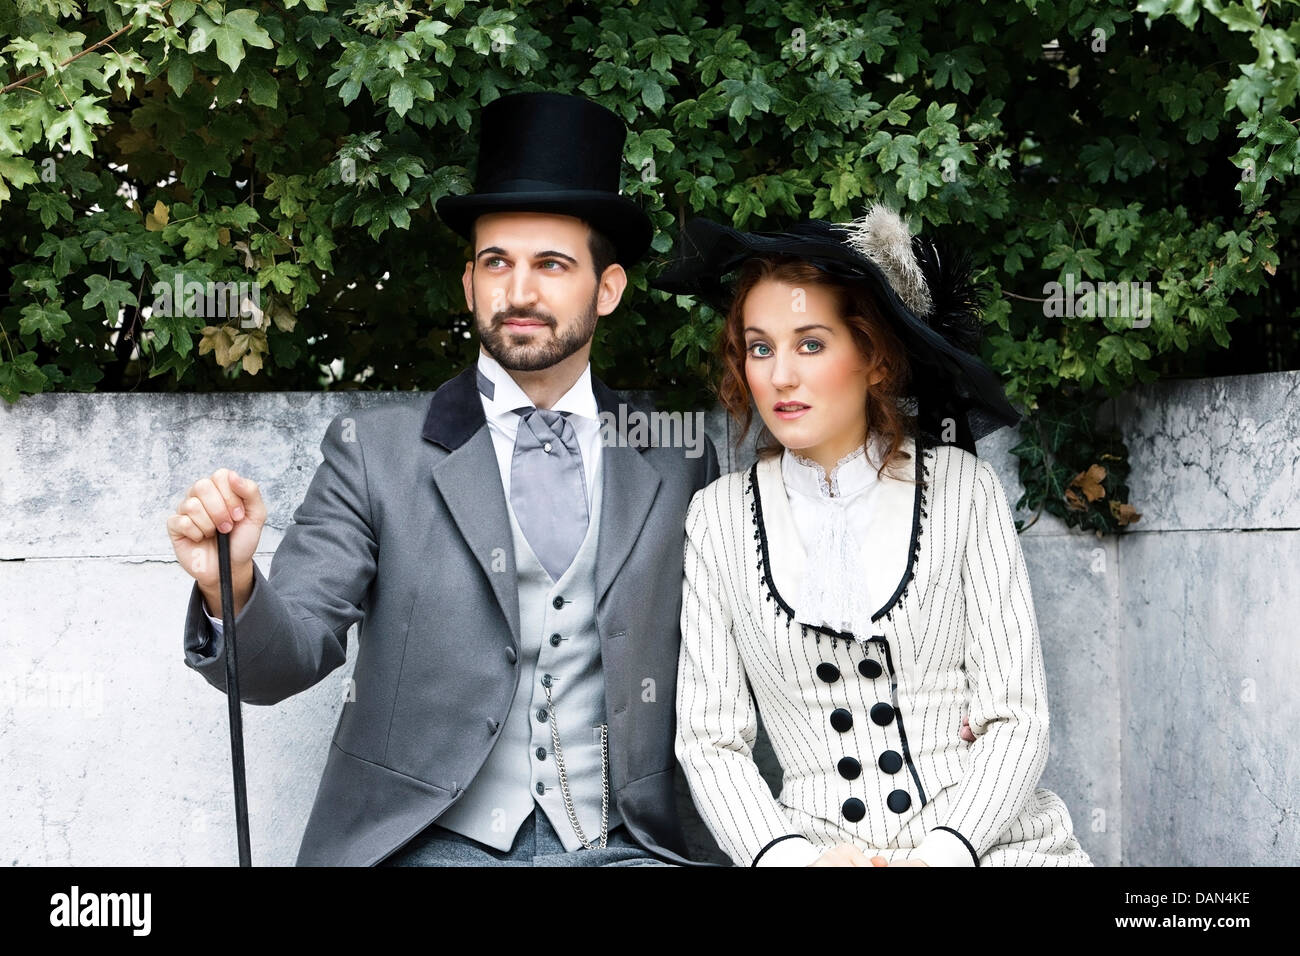 Old-fashioned dressed couple in the park Stock Photo